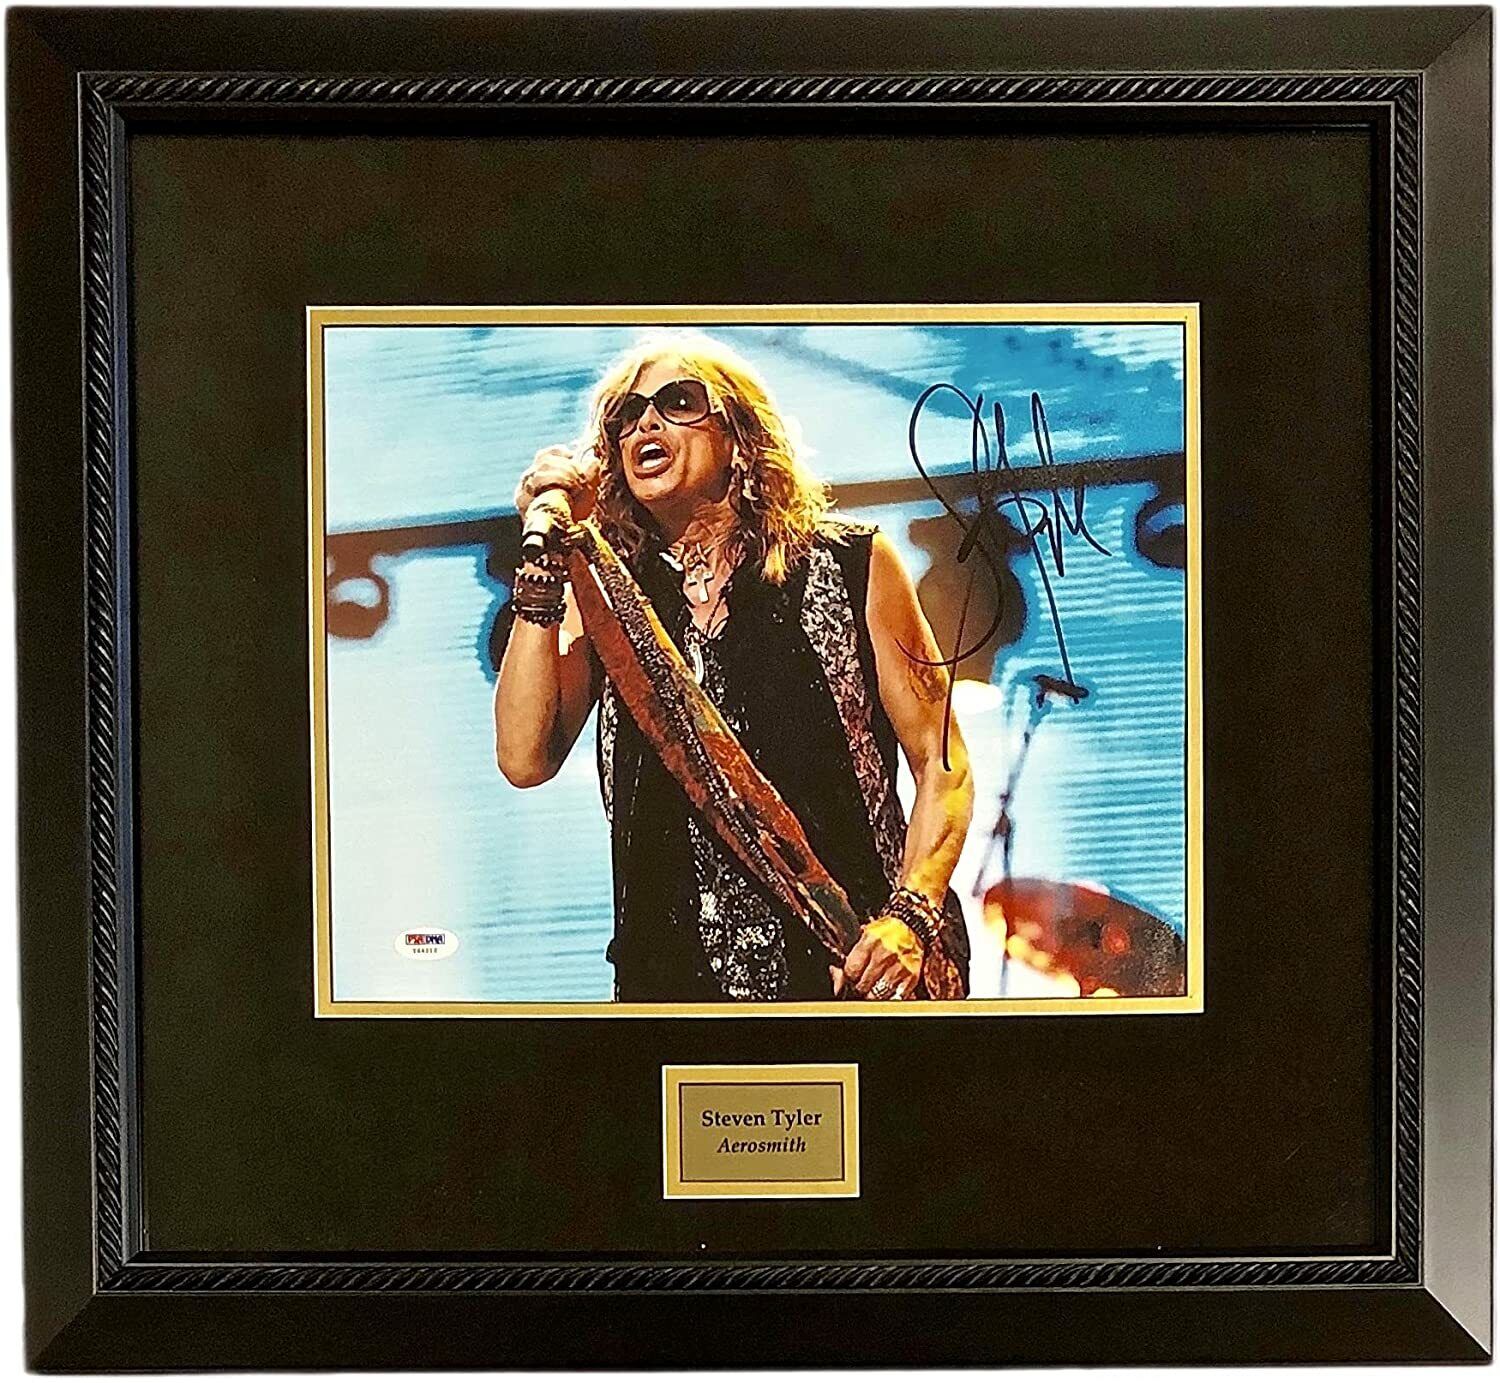 STEVEN TYLER Autographed Hand SIGNED 11x14 Photo Poster painting FRAMED AEROSMITH PSA/DNA NICE!